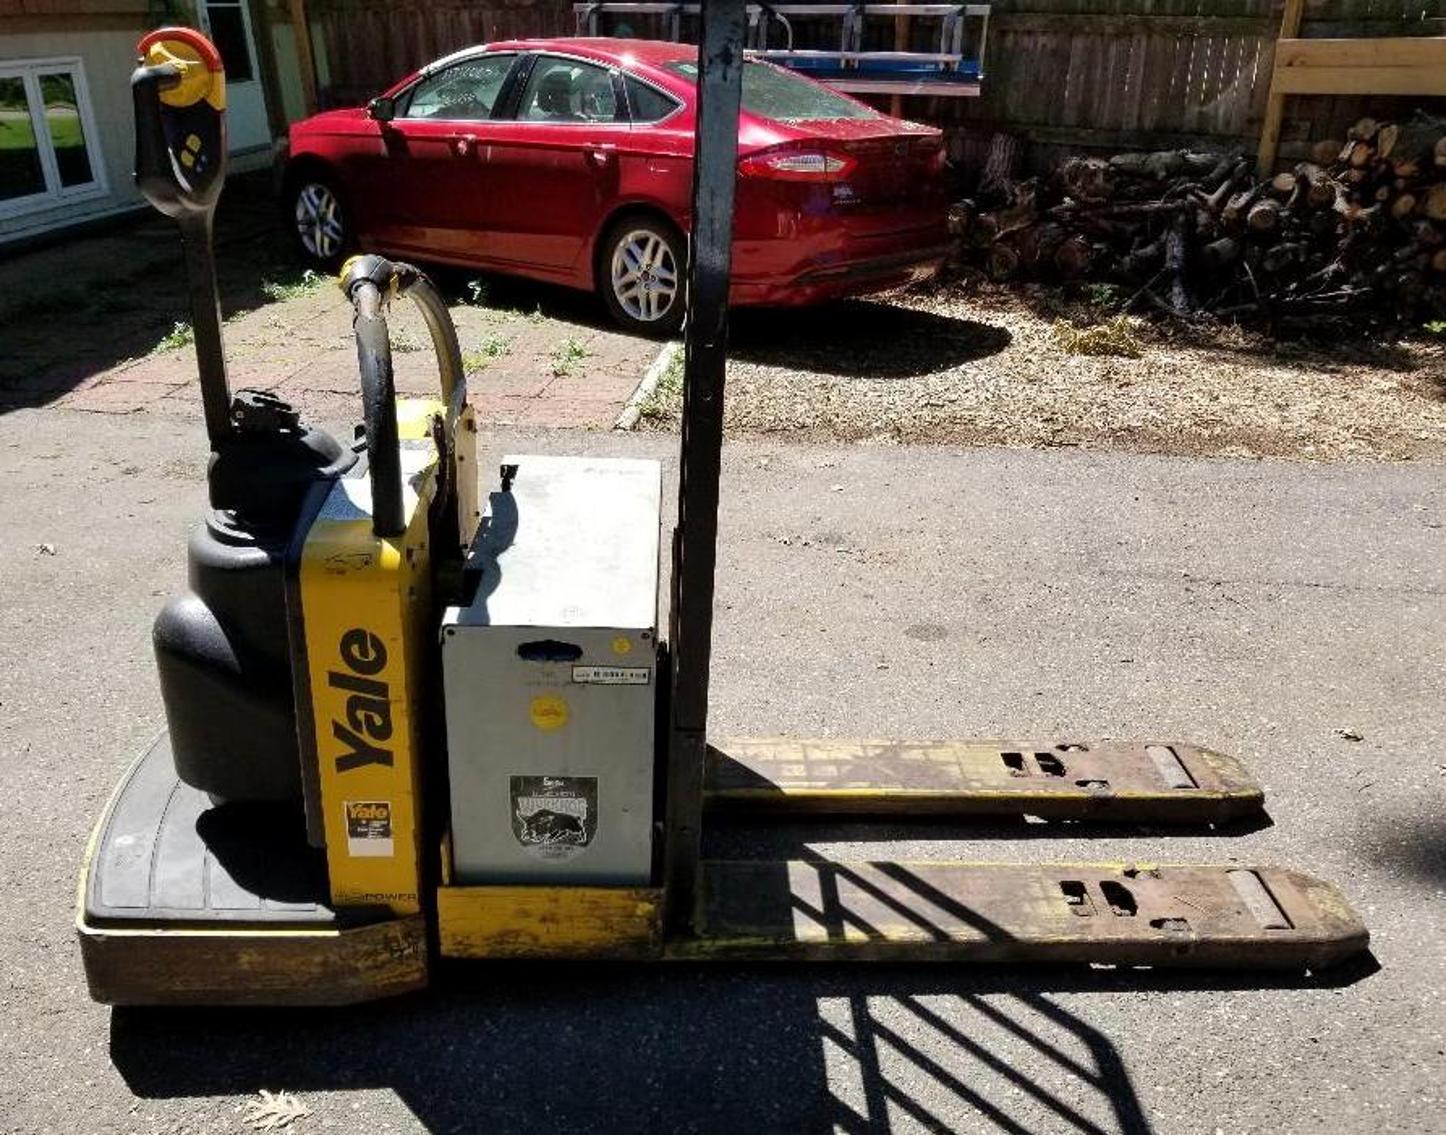 (2) Yale 6,000 Lb. Lift Trucks, Kitchen Cabinets, Foosball and Pool Table